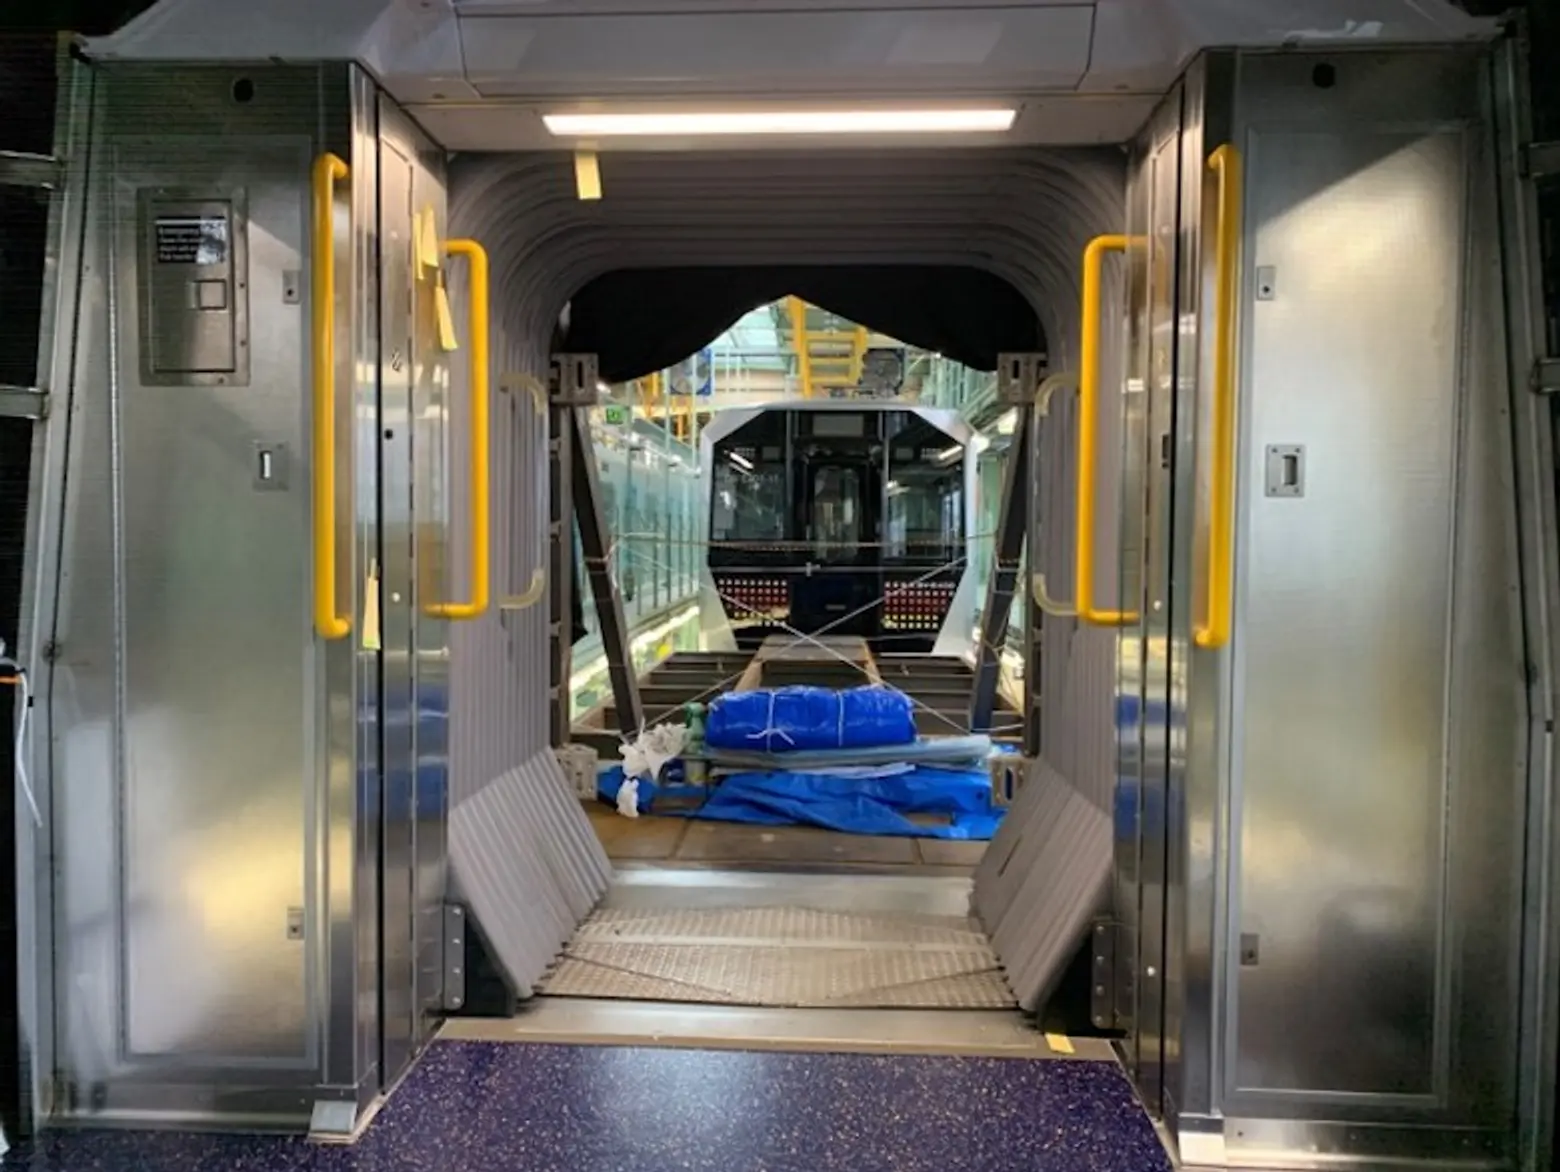 MTA unveils first look at new open-gangway subway cars